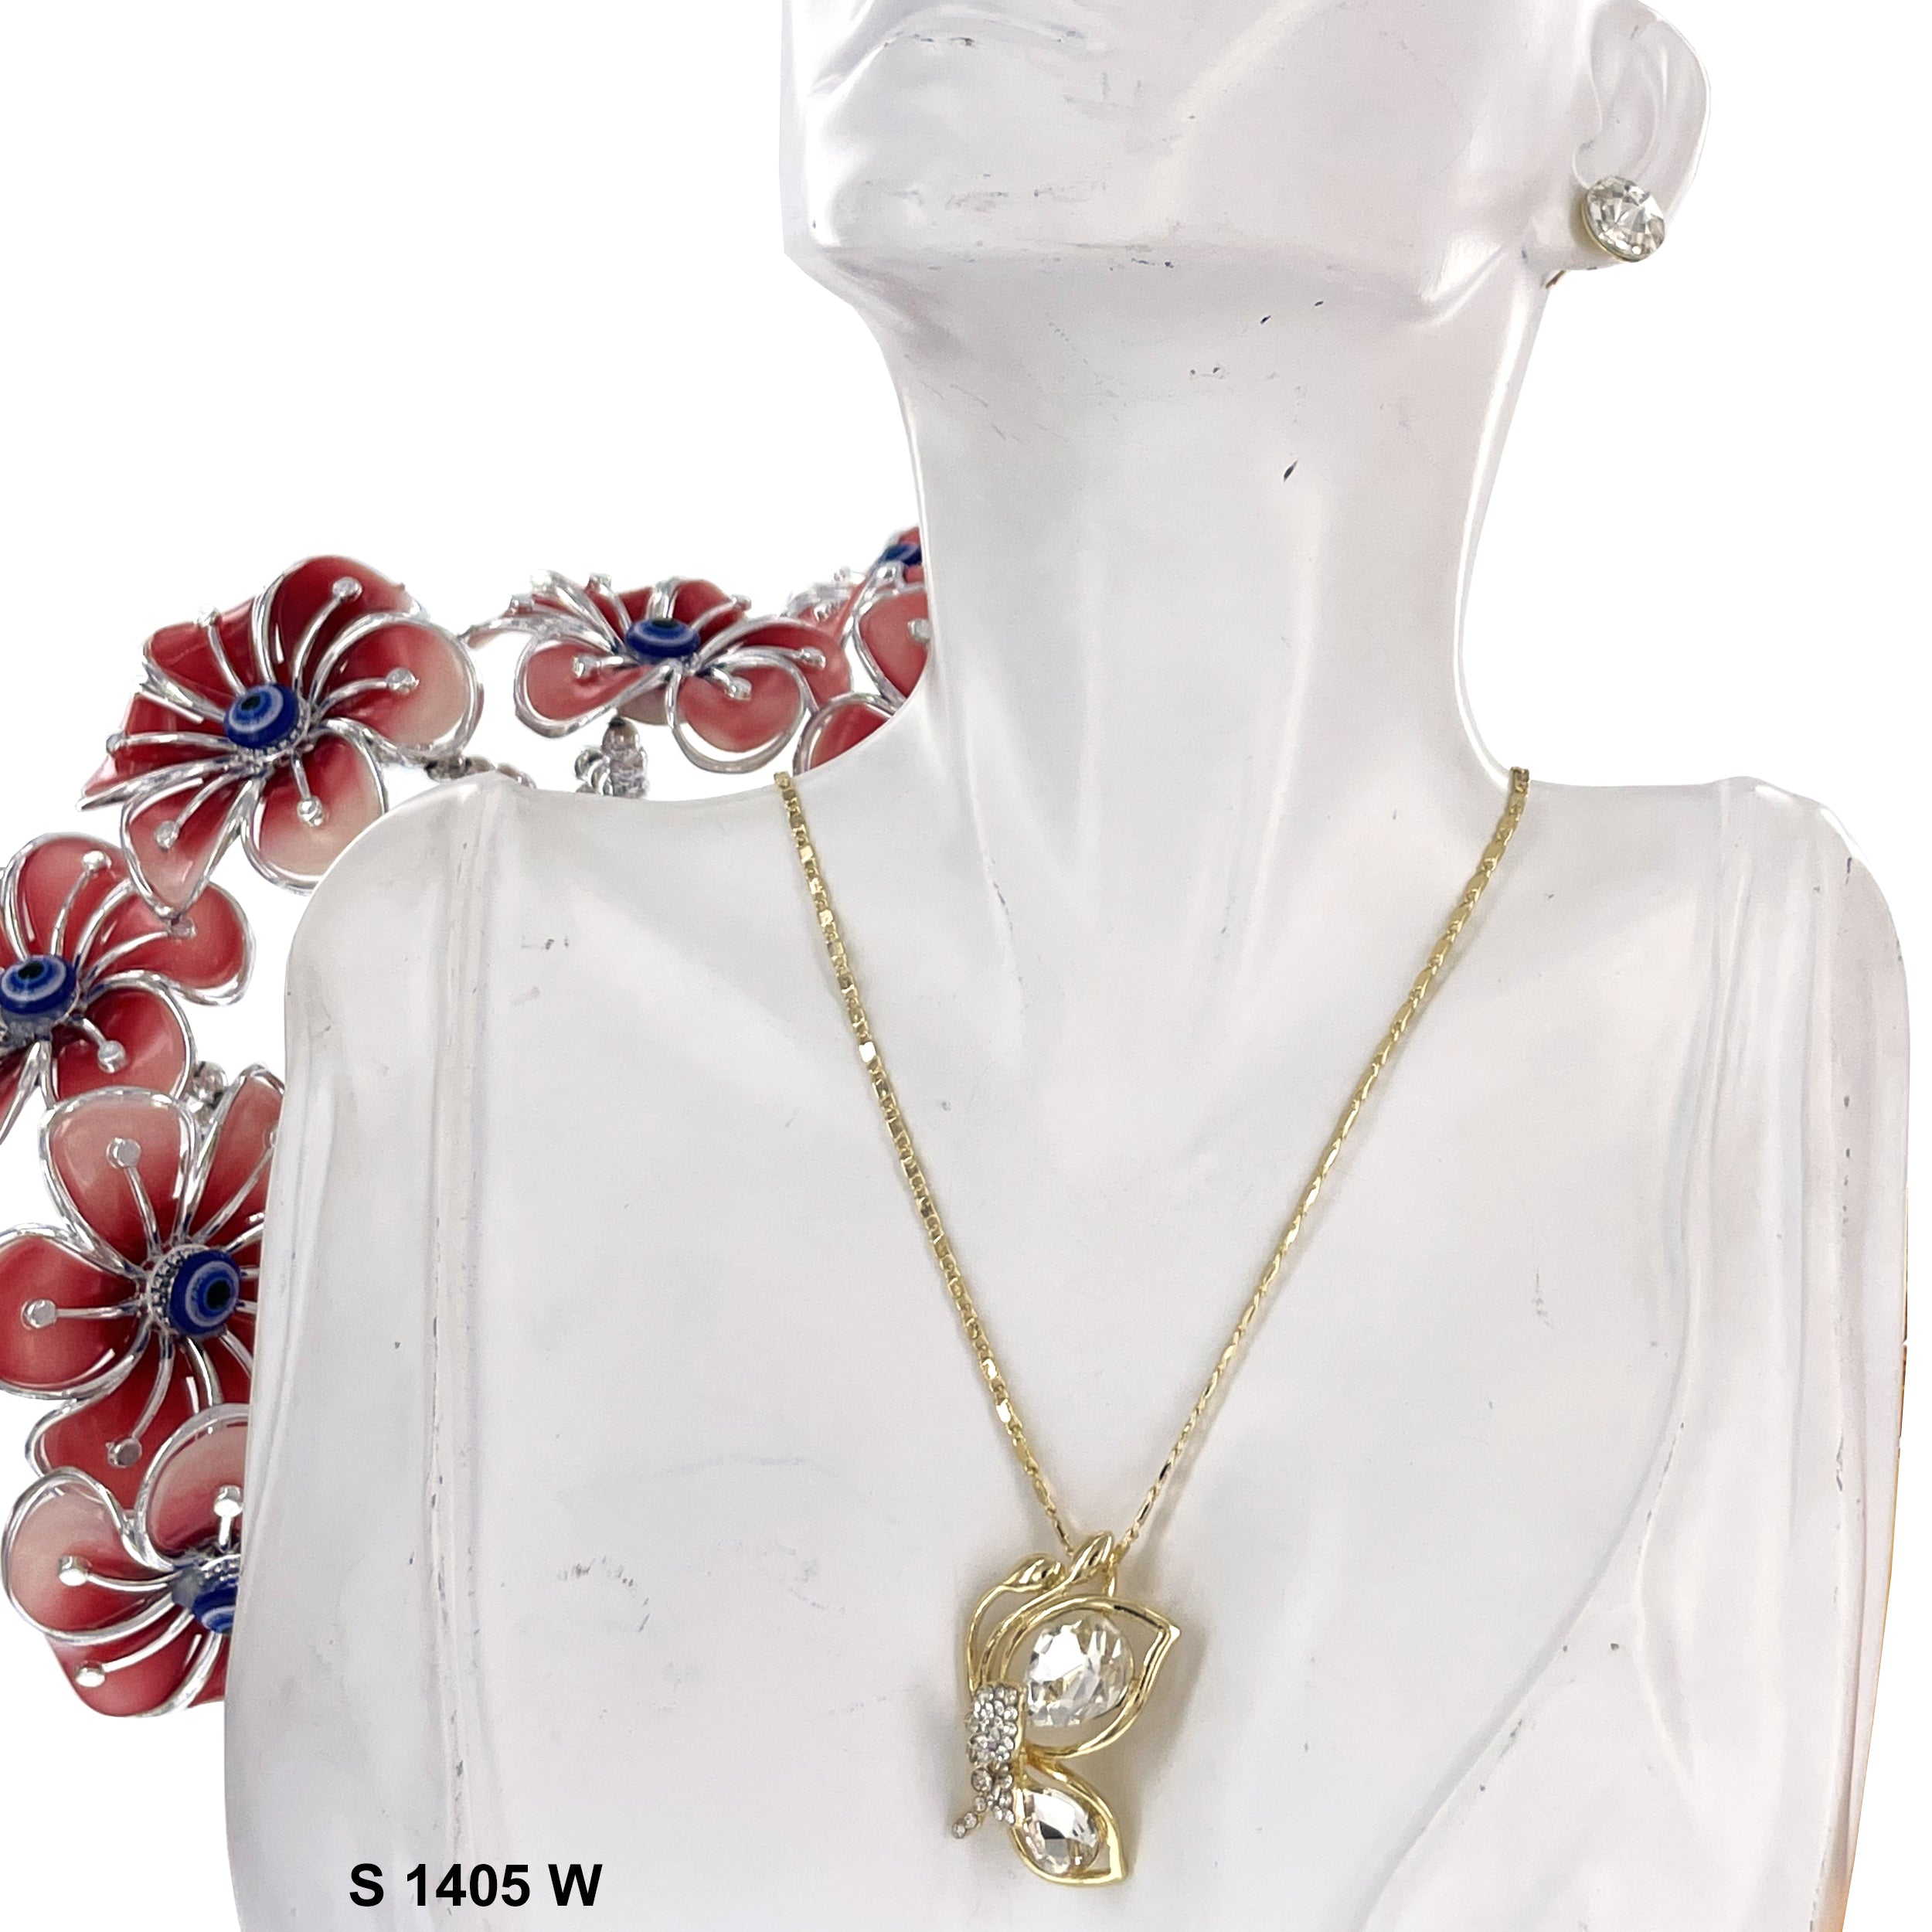 Butterfly Stoned Pendant Necklace Set S 1405 W